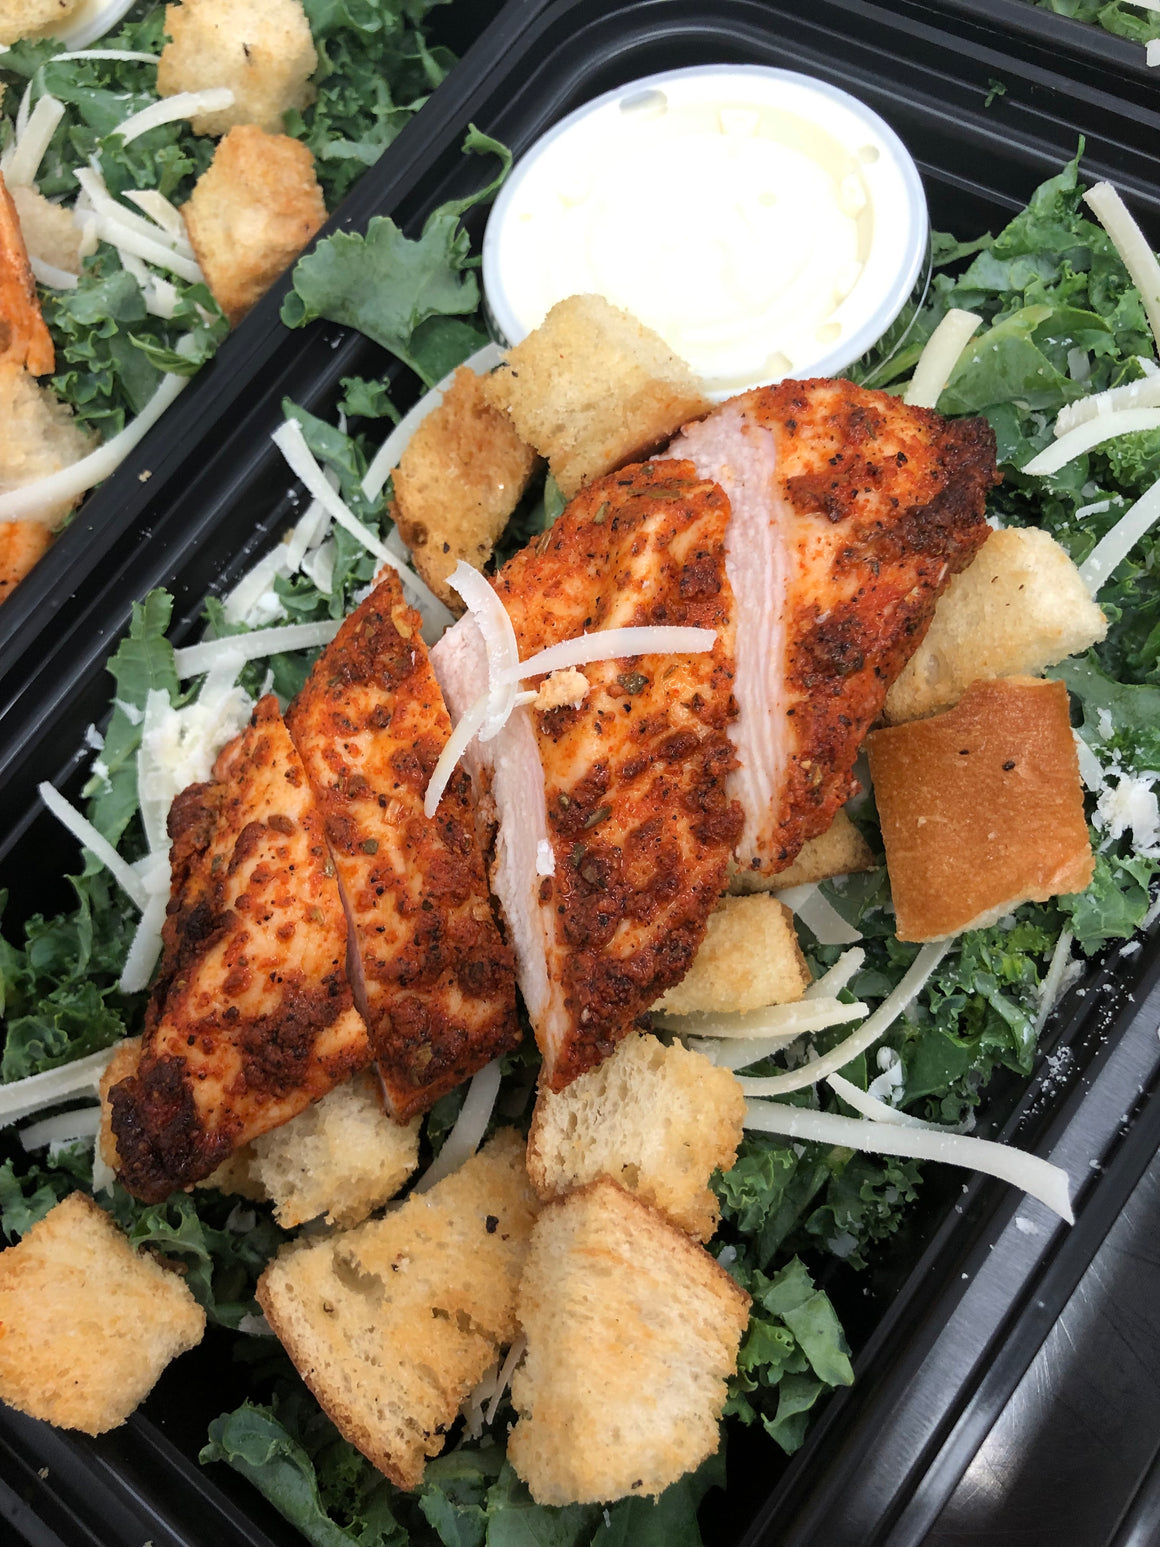 Kale Caesar (Available with Blackened Chicken)